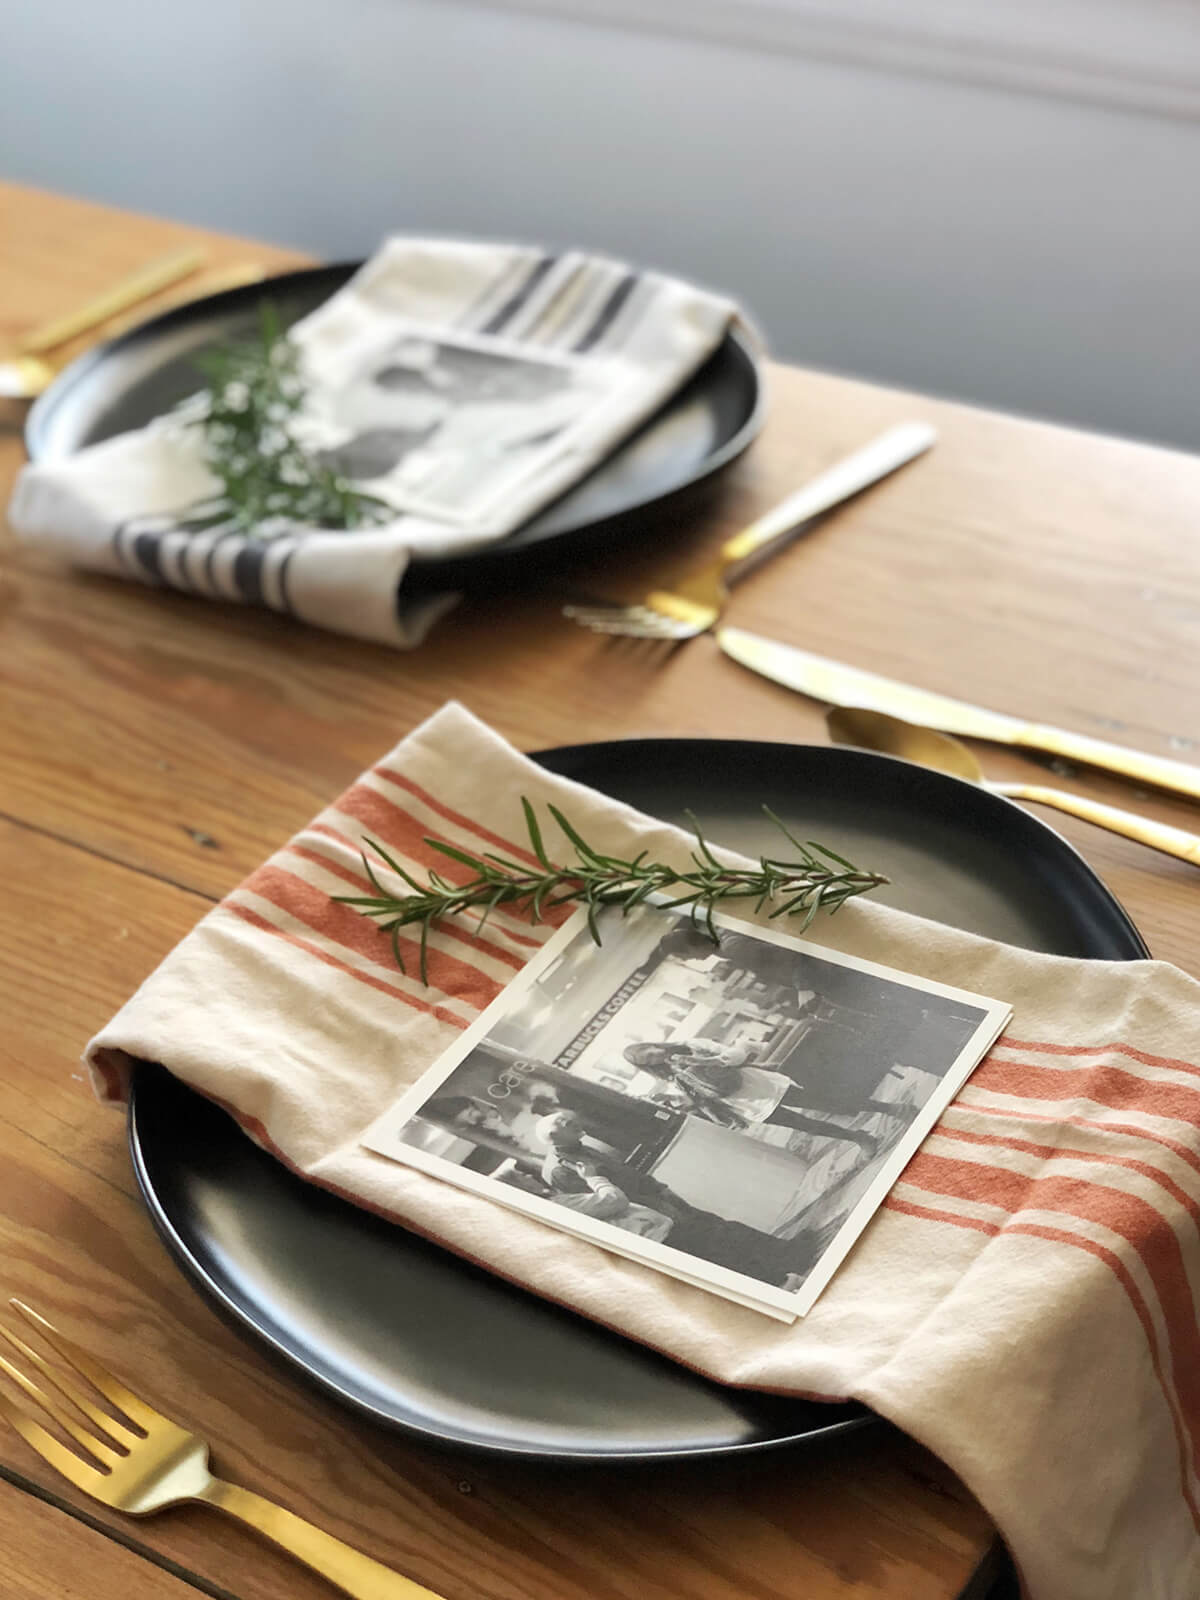 Photo prints used as table place settings for holiday dinner